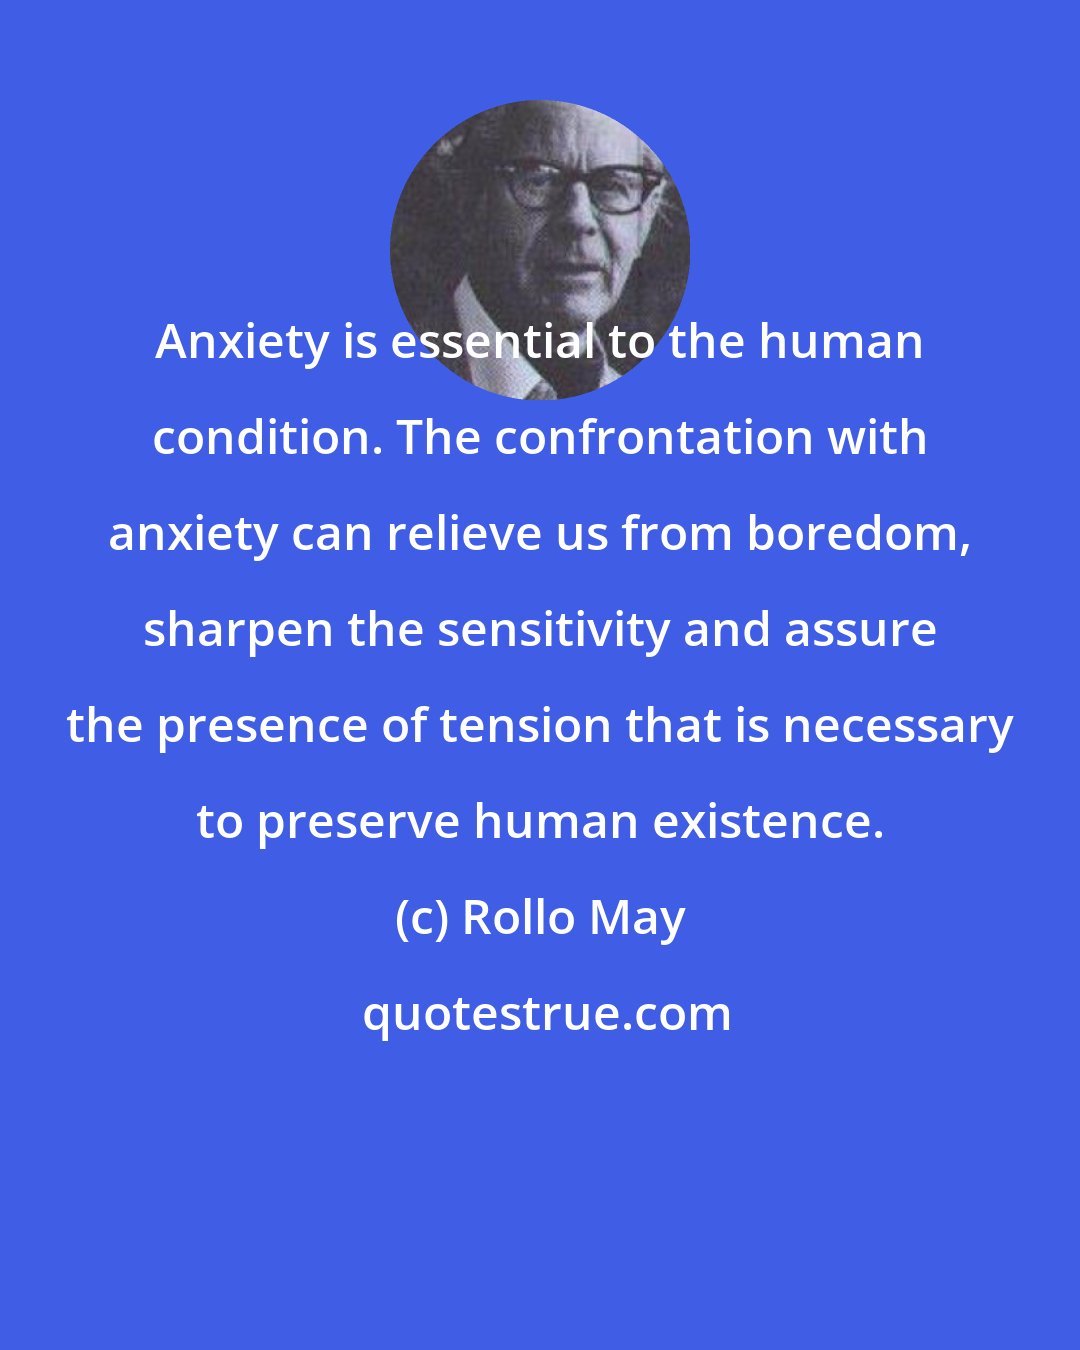 Rollo May: Anxiety is essential to the human condition. The confrontation with anxiety can relieve us from boredom, sharpen the sensitivity and assure the presence of tension that is necessary to preserve human existence.